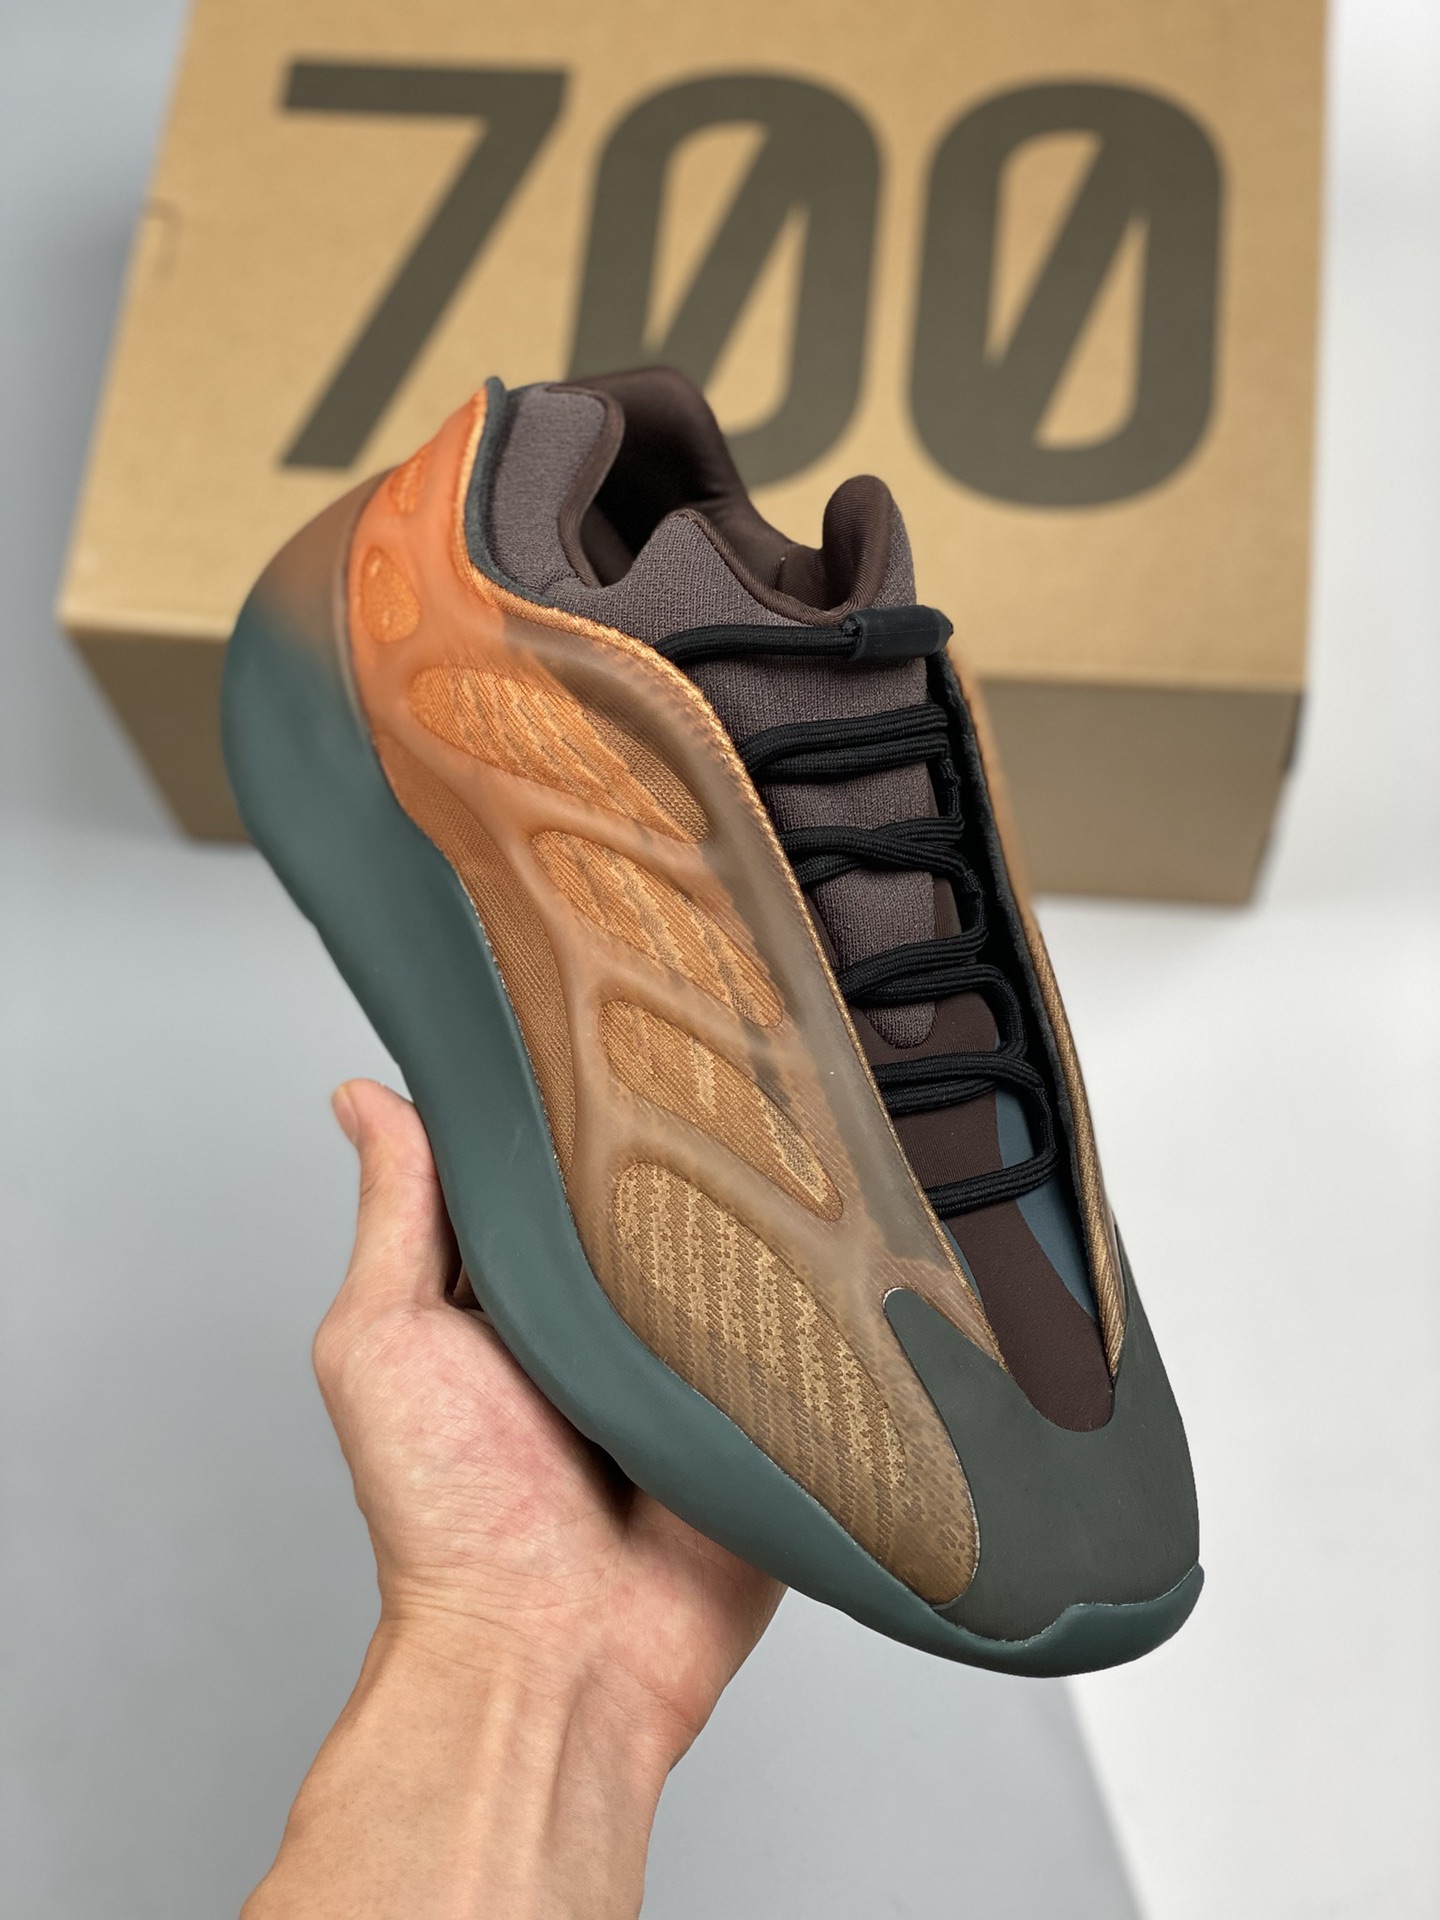 yeezy copper for sale